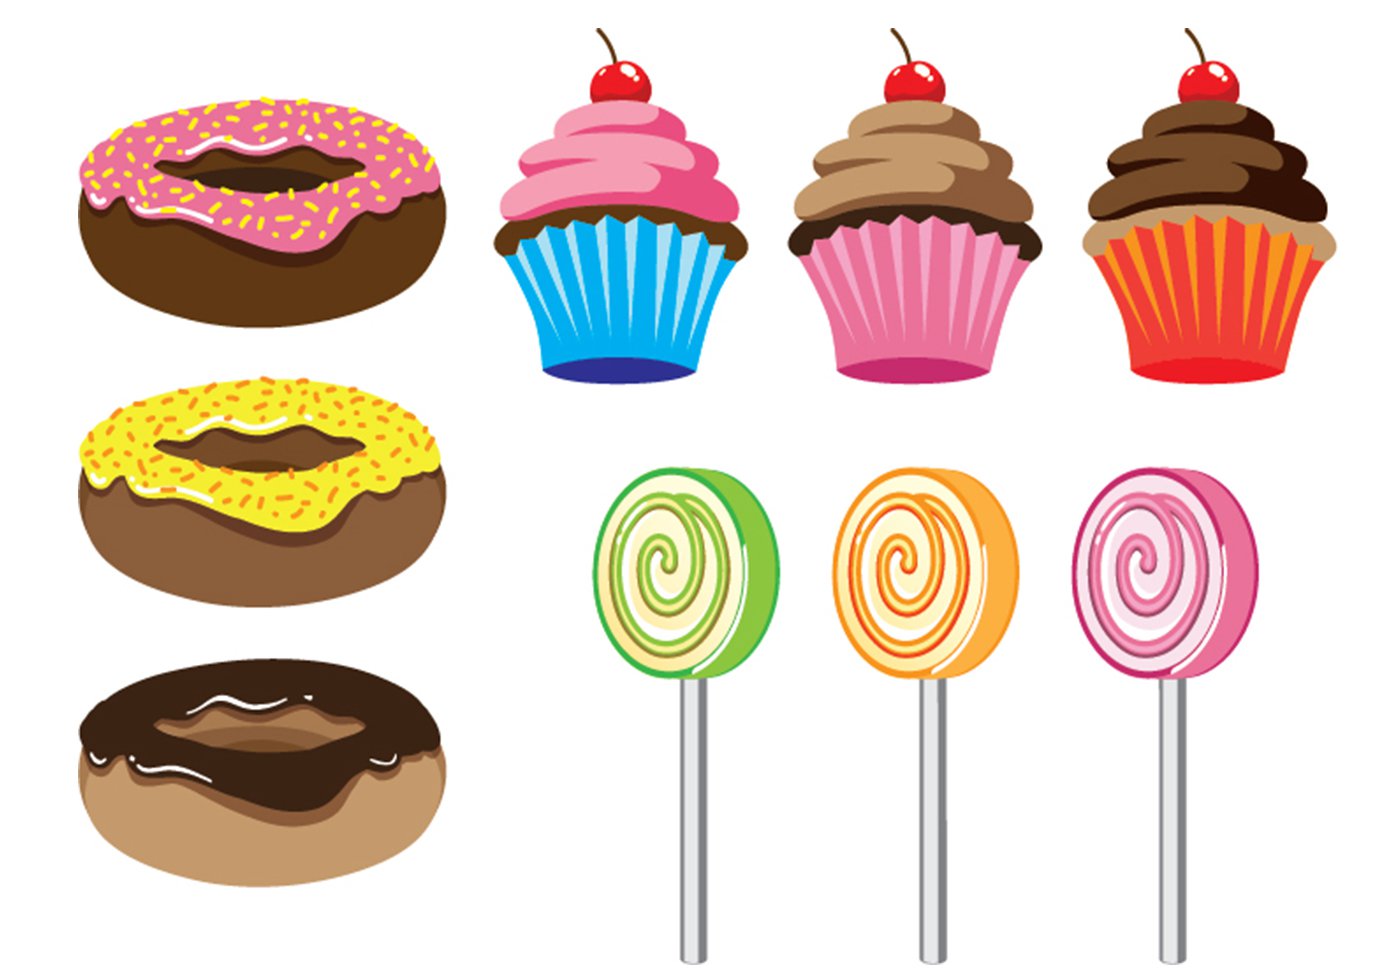 best free vector clipart download site - photo #17